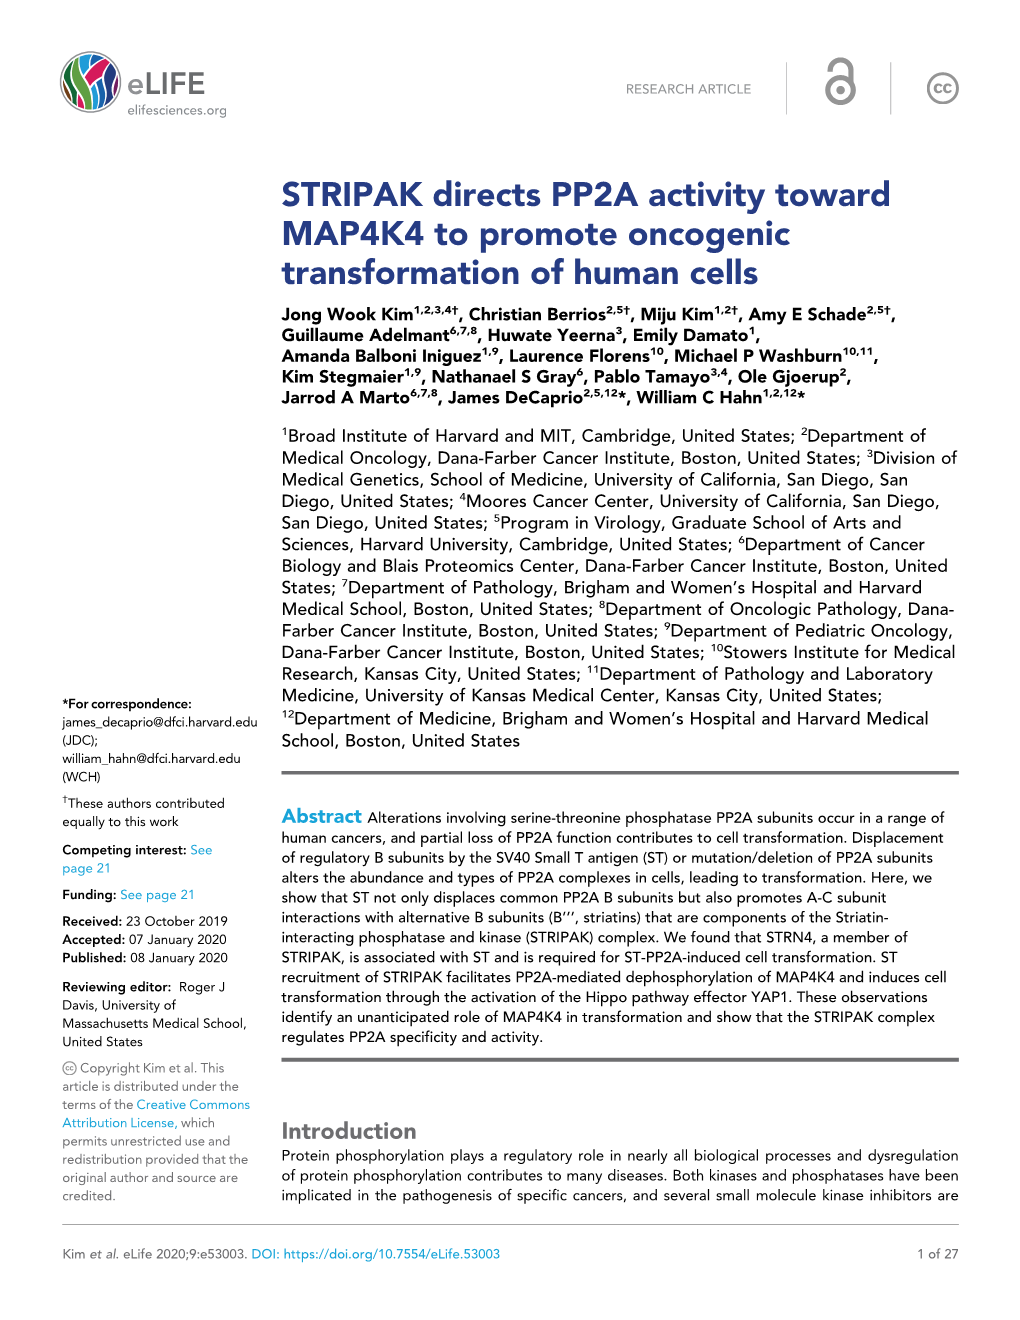 STRIPAK Directs PP2A Activity Toward MAP4K4 to Promote Oncogenic Transformation of Human Cells